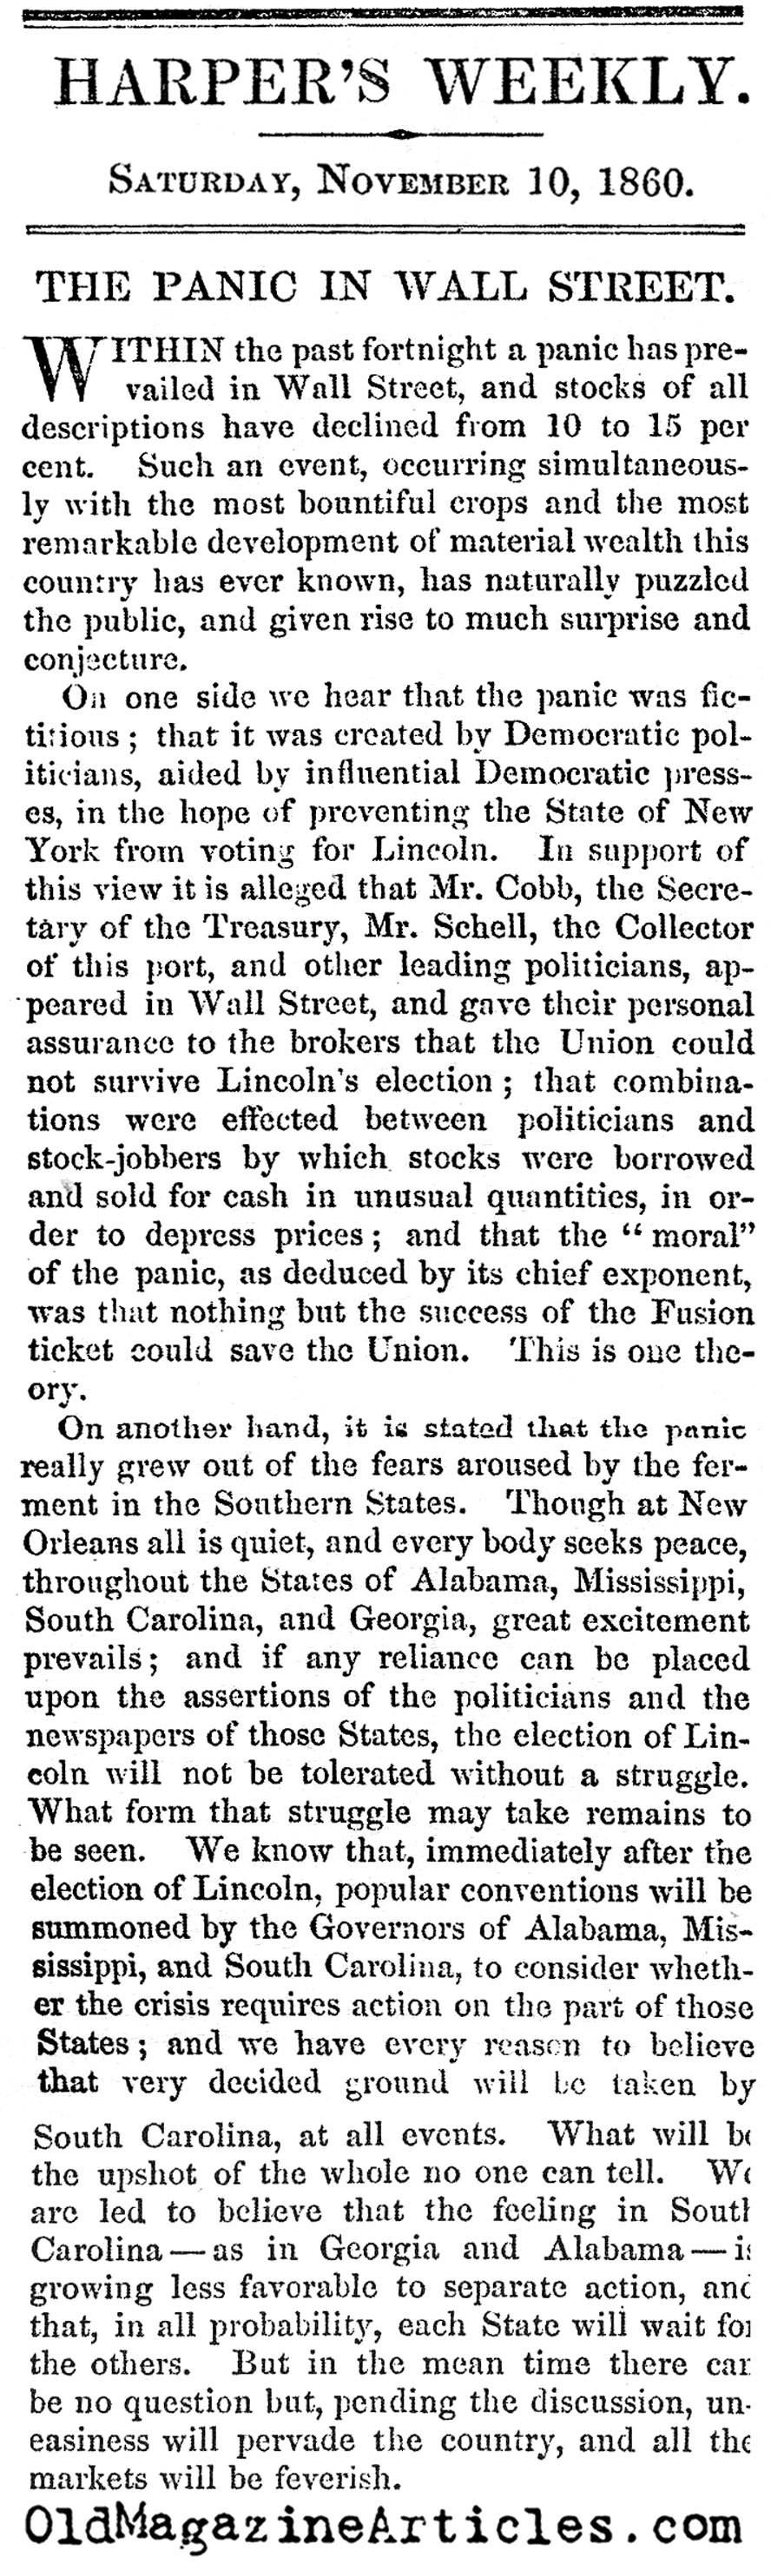 Lincoln is Elected and the Markets Tank (Harper's Weekly, 1860)